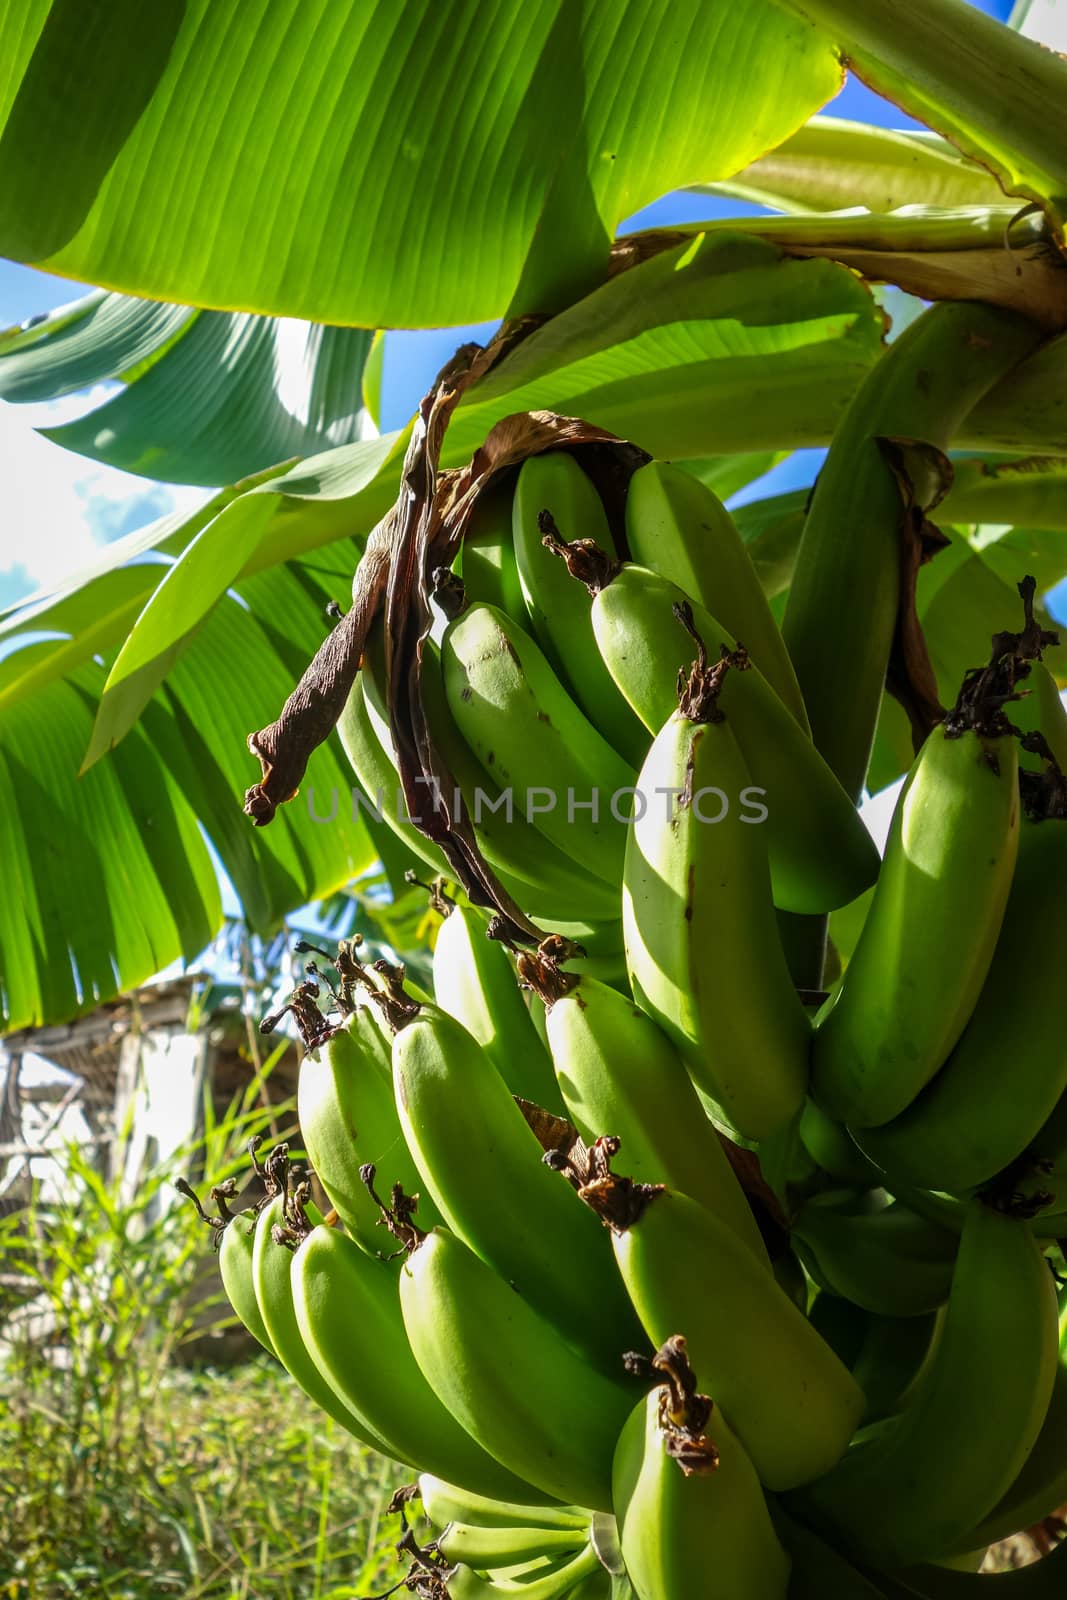 Banana tree detail in a tropical environment, easter island, Chile